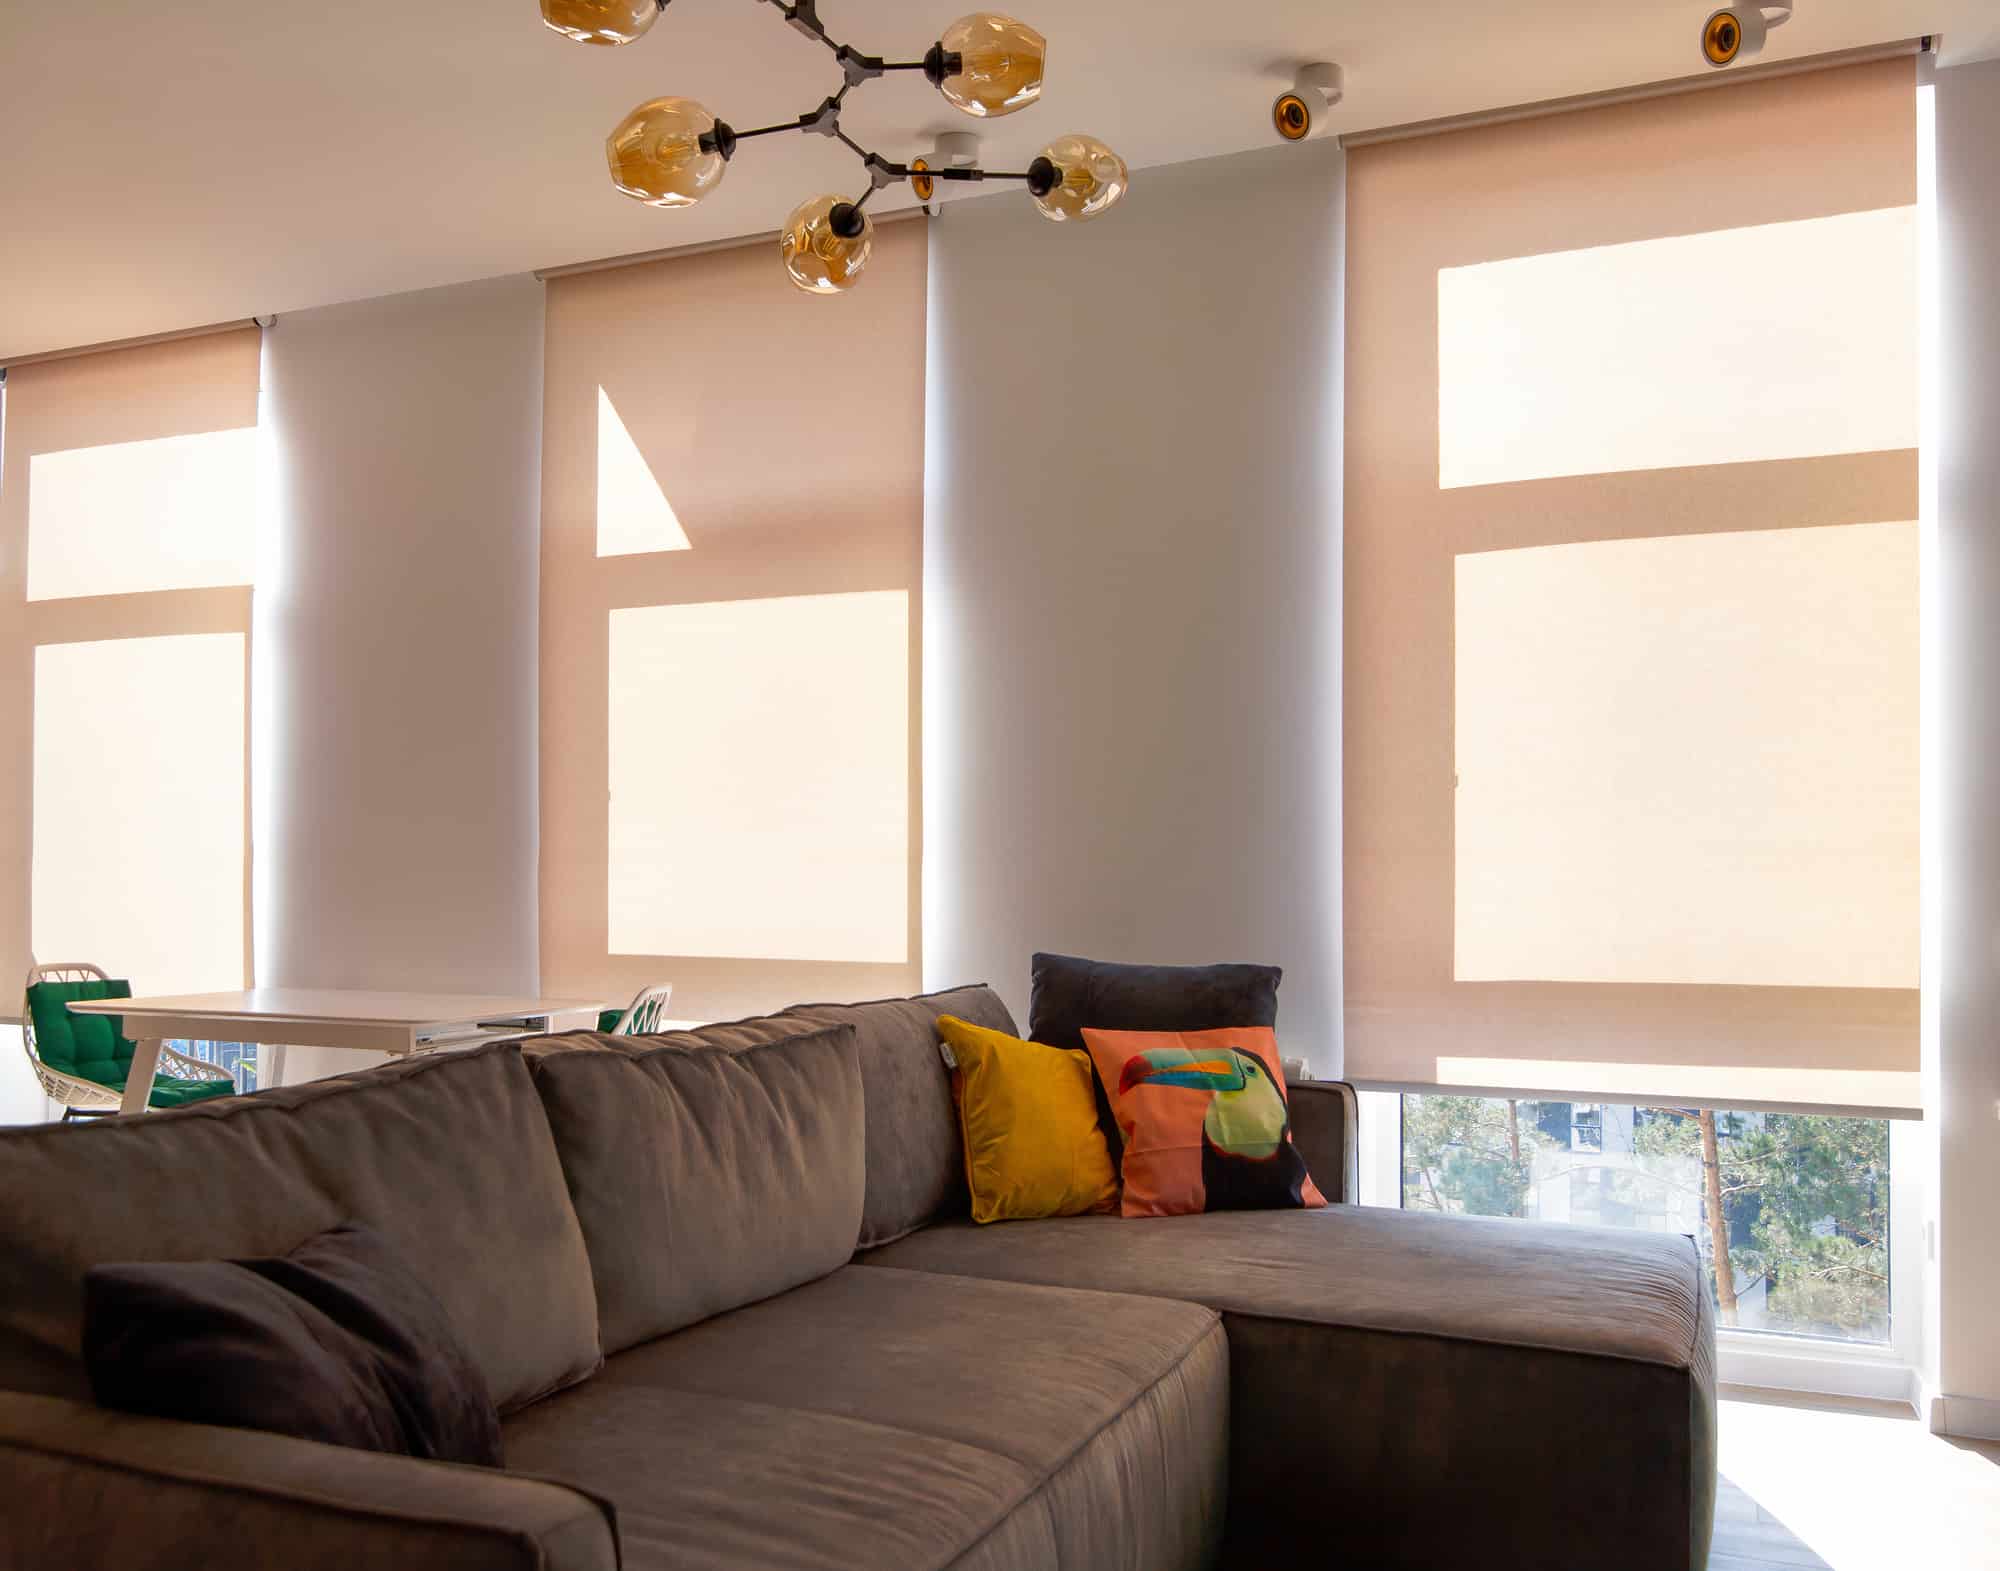 Motorized roller blinds. A sofa with colorful pillows in the room near windows with roller blinds. Automatic roller shades on large window to the floor in the interior. Sunny day.